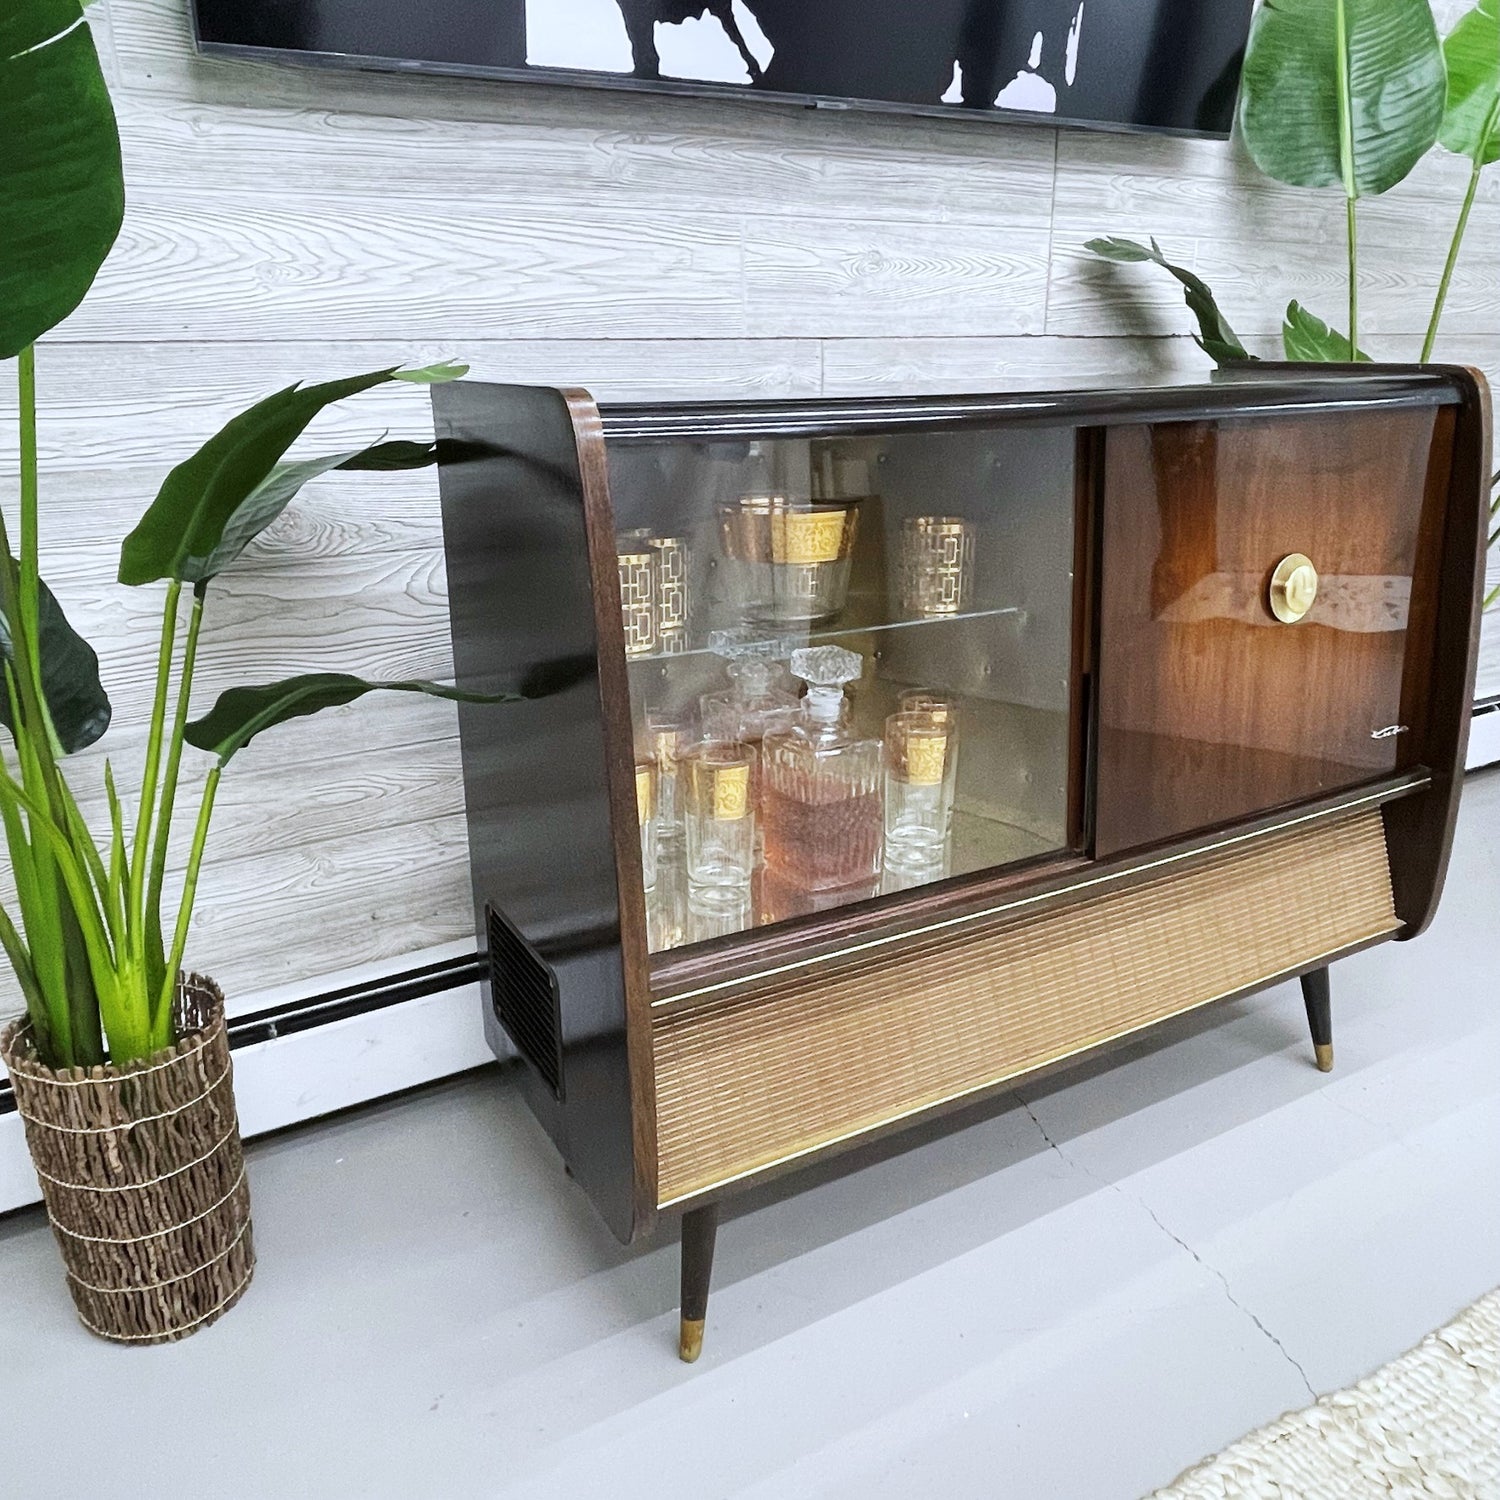 SOLD OUT!!! KUBA 50s Mid Century Stereo Console Record Player Changer w/Whiskey Bar Cabinet - AM FM Bluetooth Alexa The Vintedge Co.